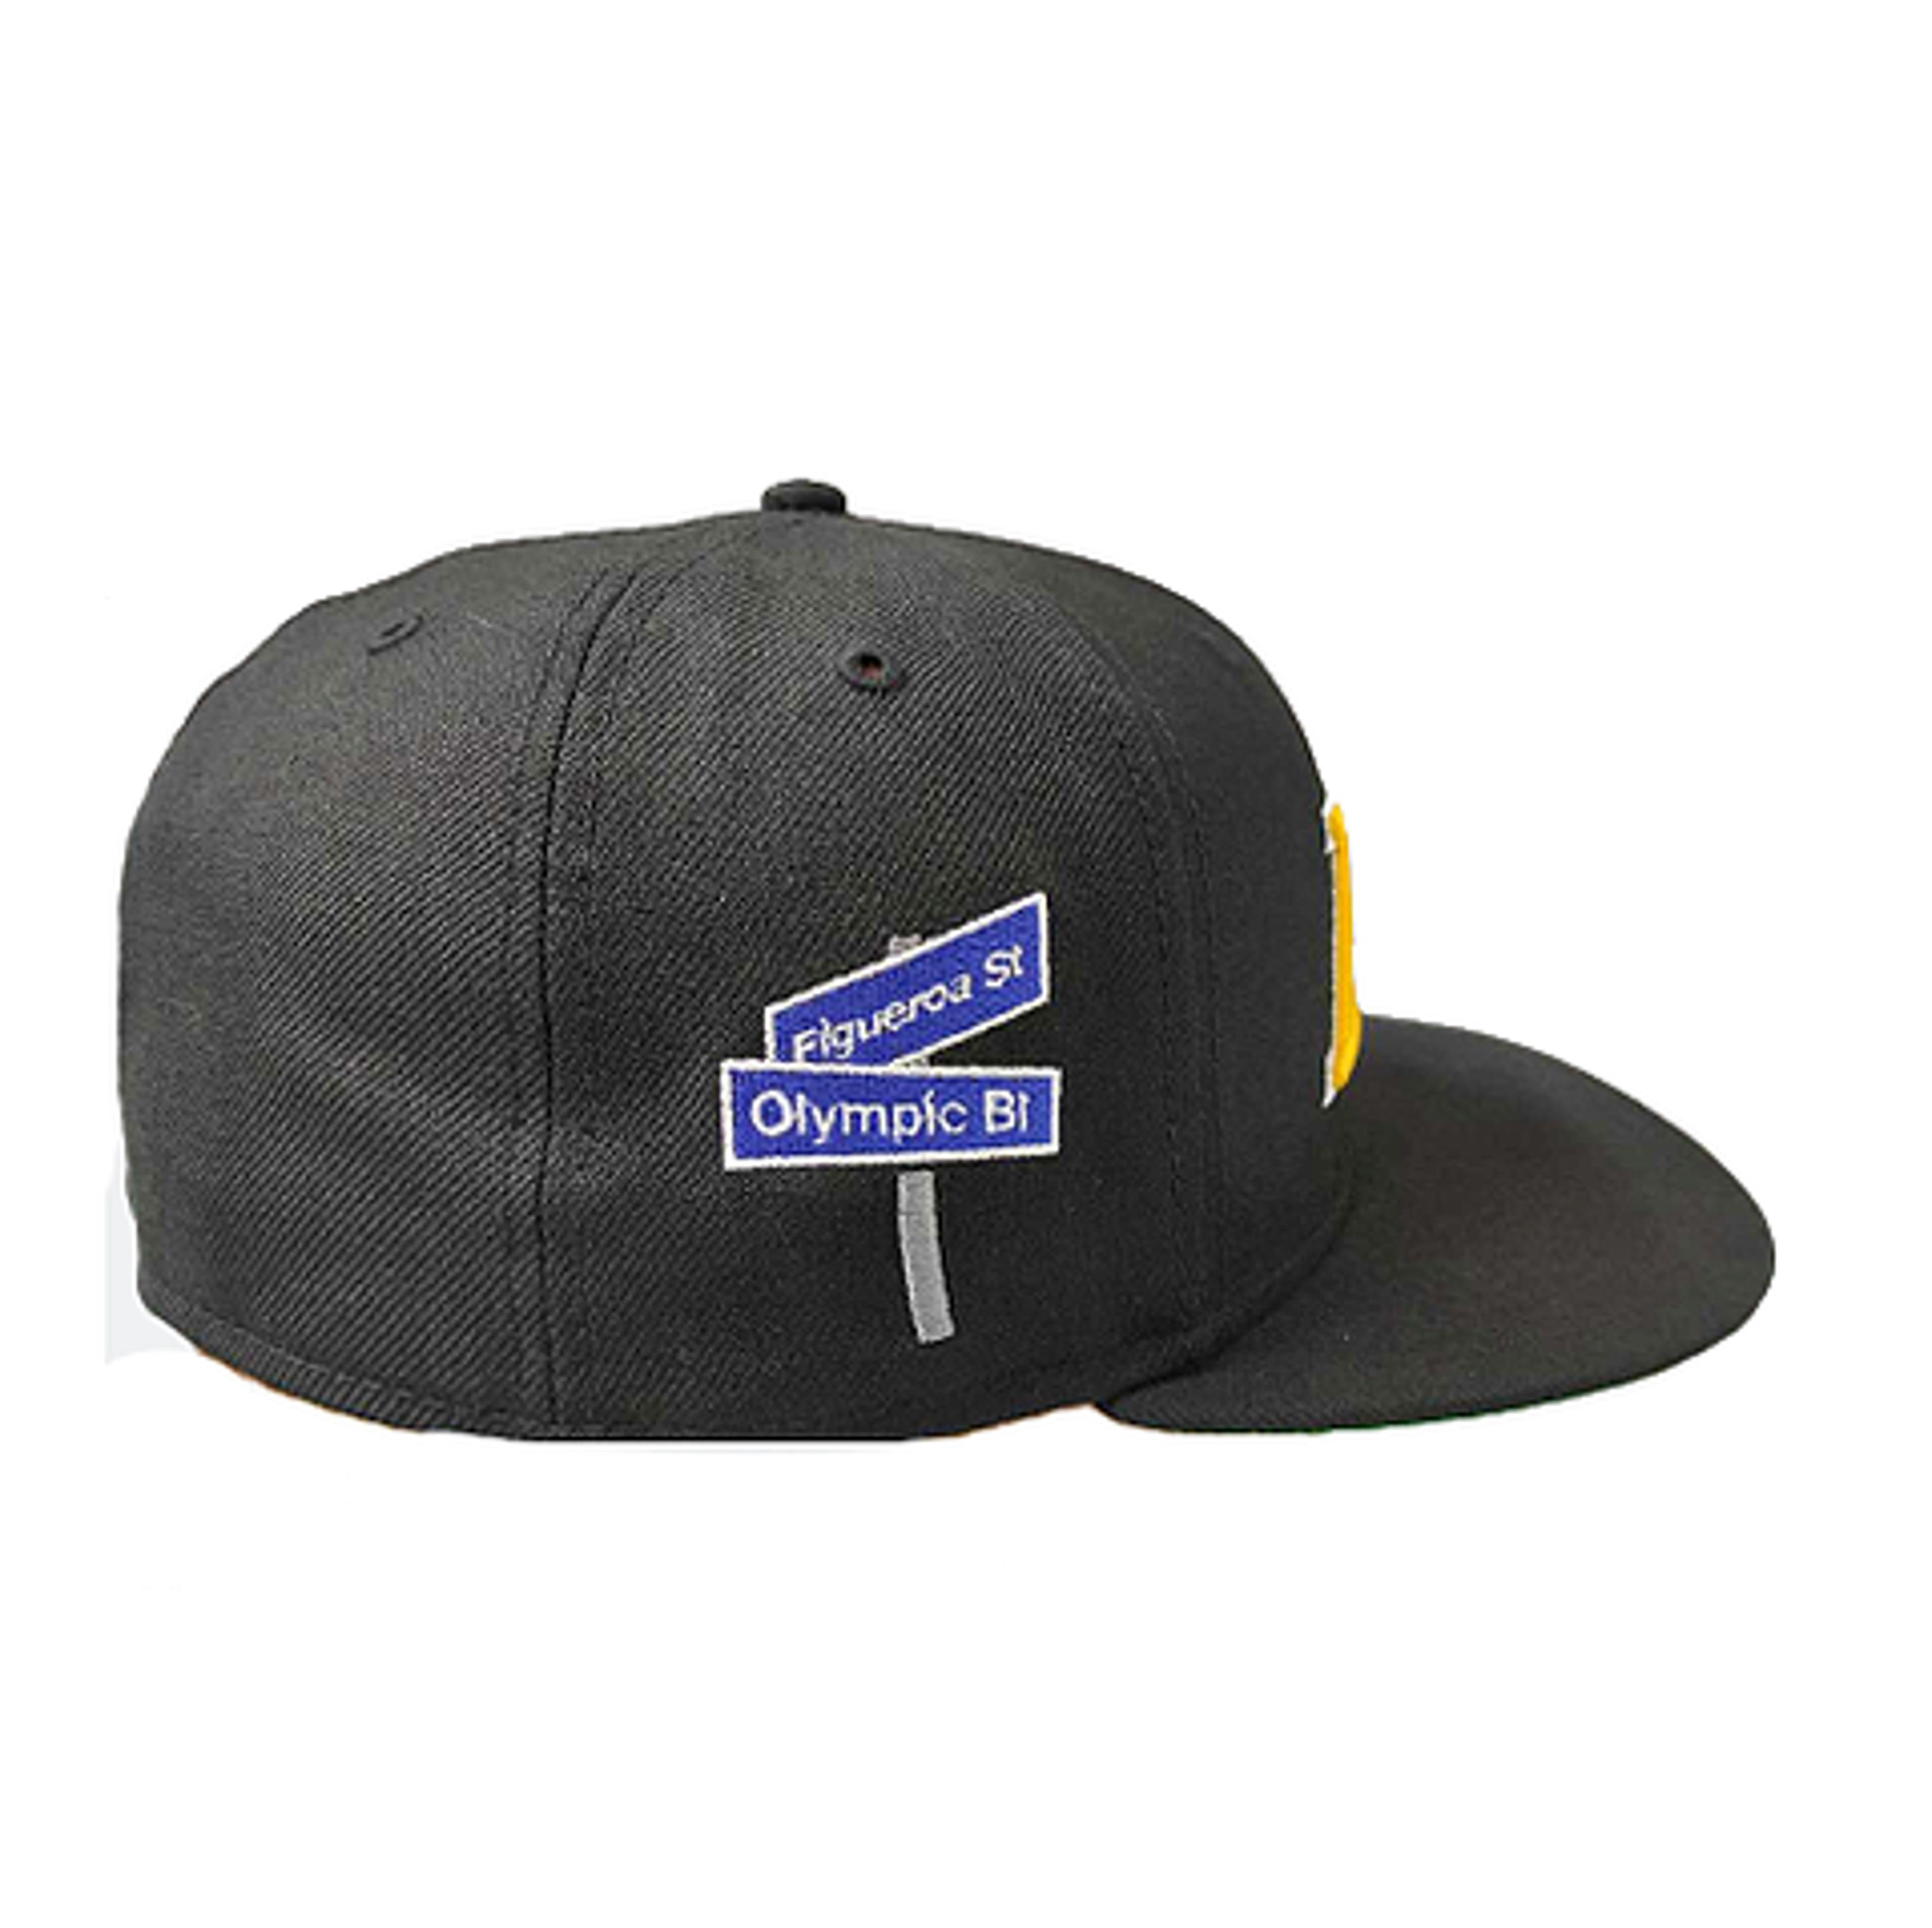 Alternate View 1 of Los Angeles Lakers - Ben Baller 59FIFTY Black